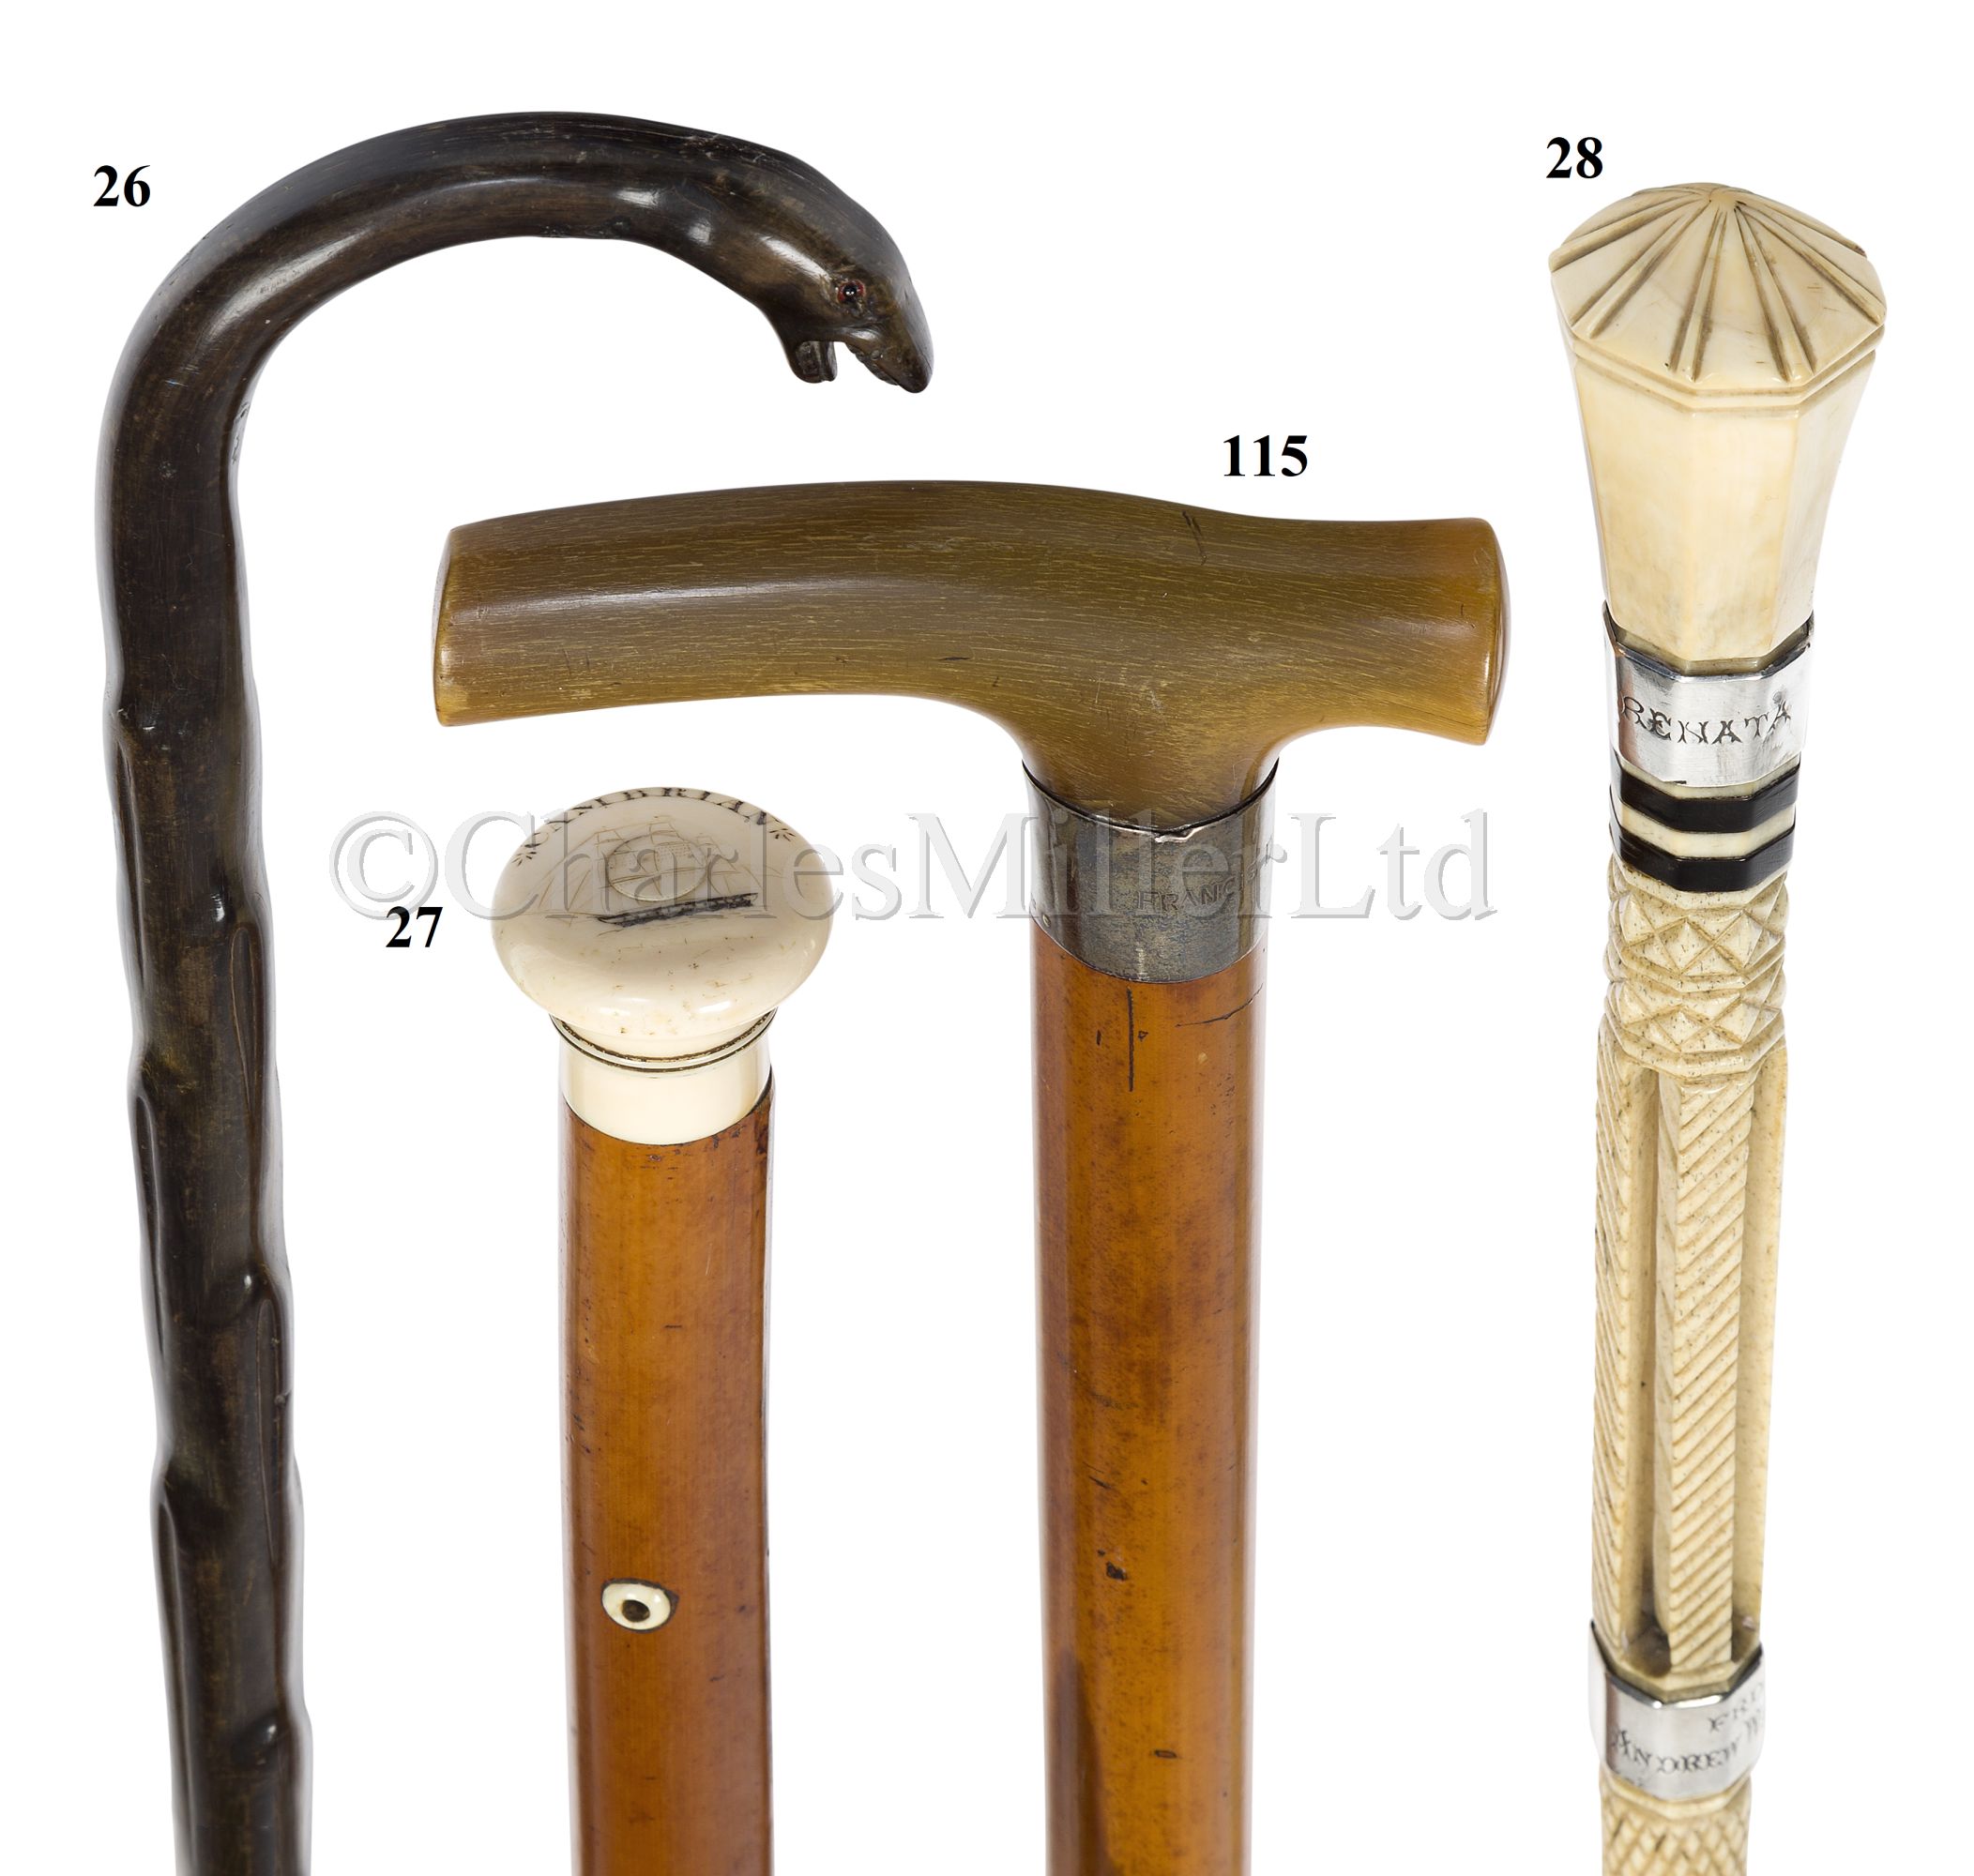 Ø A 19TH CENTURY MALACCA AND MARINE IVORY WALKING STICK COMMEMORATING THE WHALER CAMBRIAN